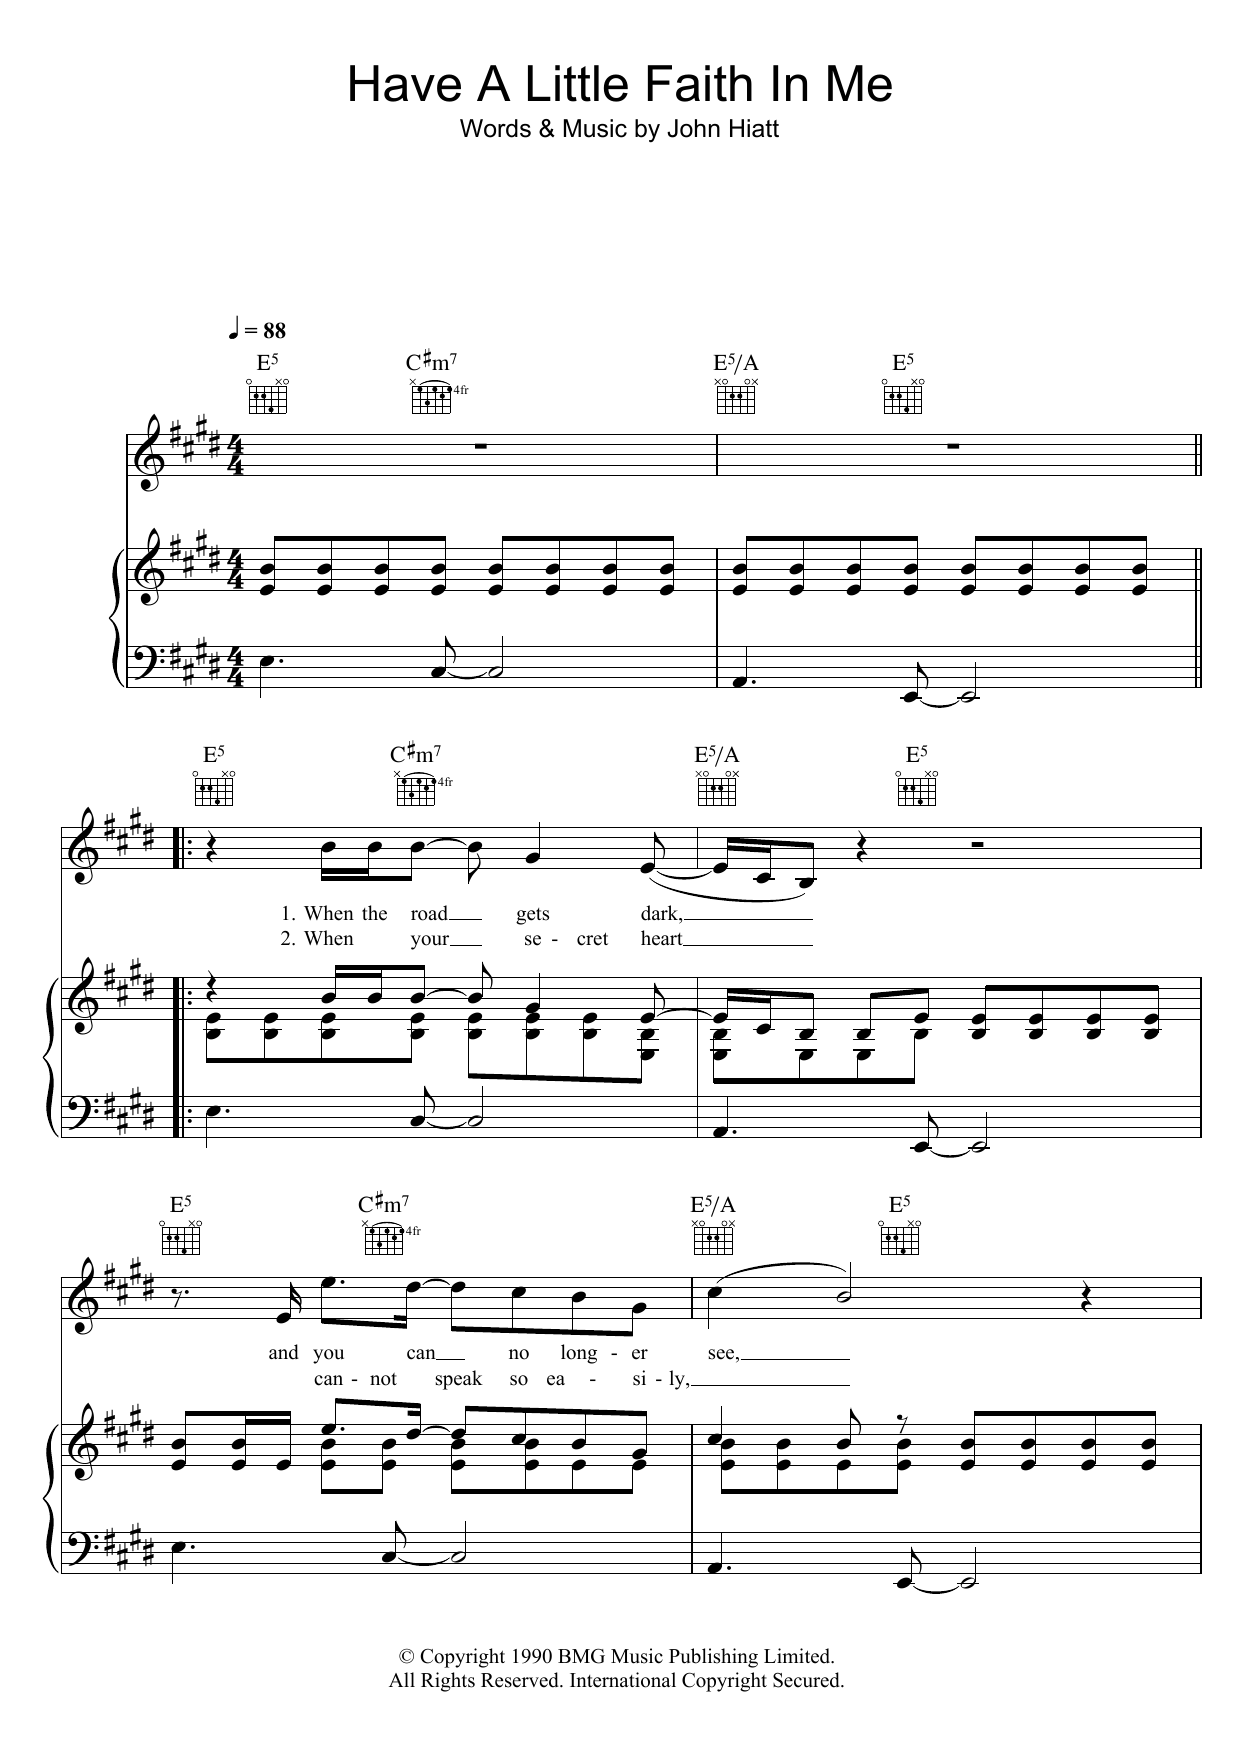 John Hiatt Have A Little Faith In Me sheet music notes and chords. Download Printable PDF.